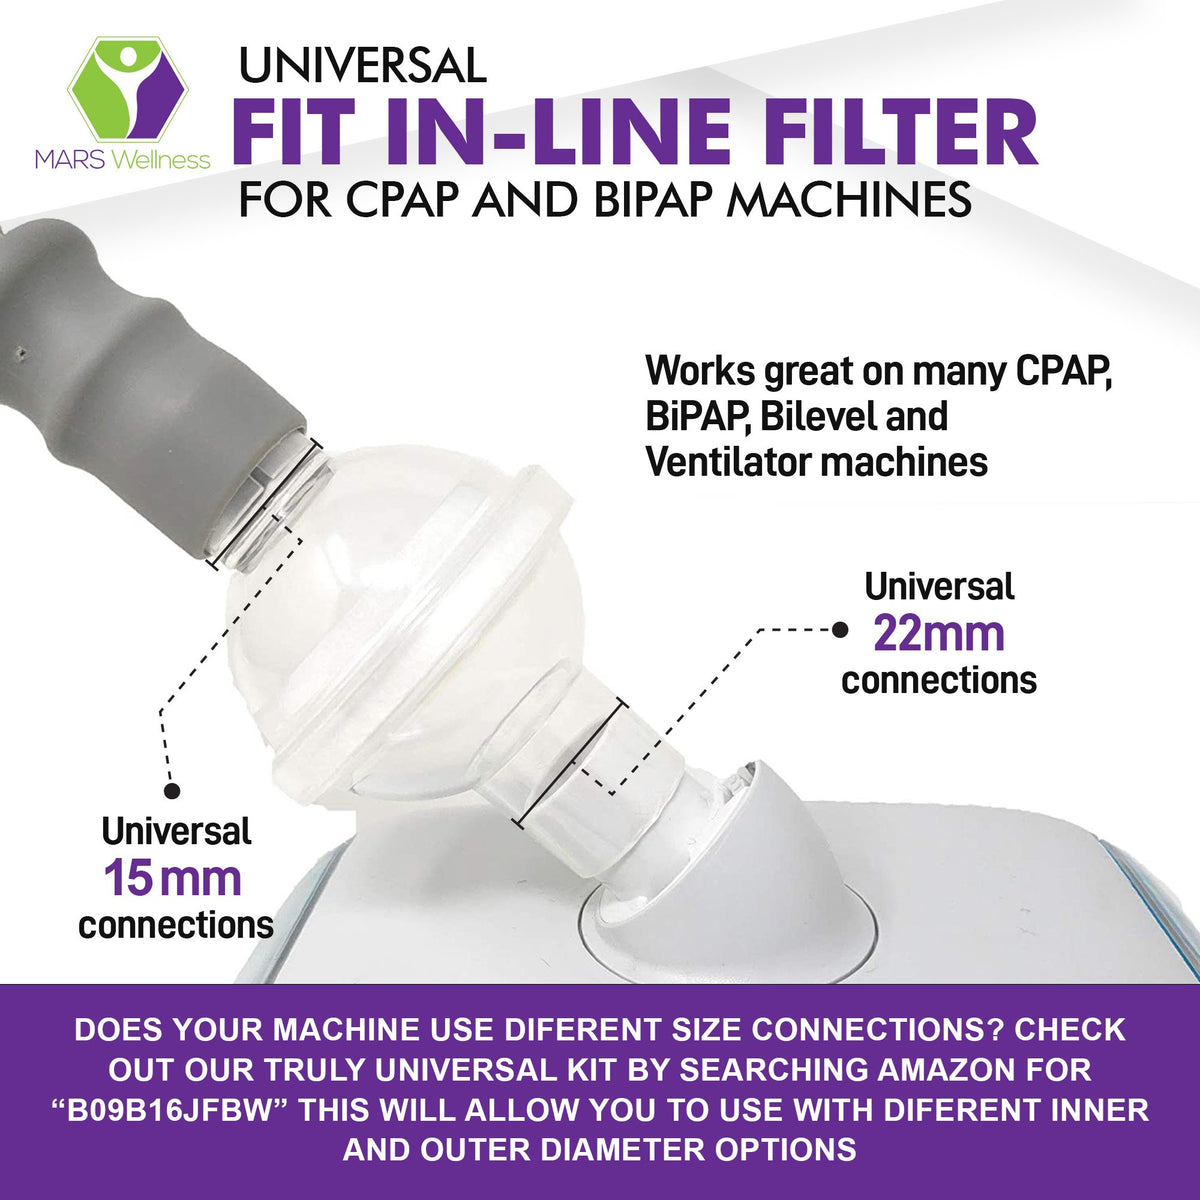 Truly Universal Fit in-Line Filter Kit for CPAP and BiPAP Machines Multiple Size Connectors - 15mm to 15mm, 15mm to 22mm, 22mm to 22mm - 6 Pack - Mars Med Supply